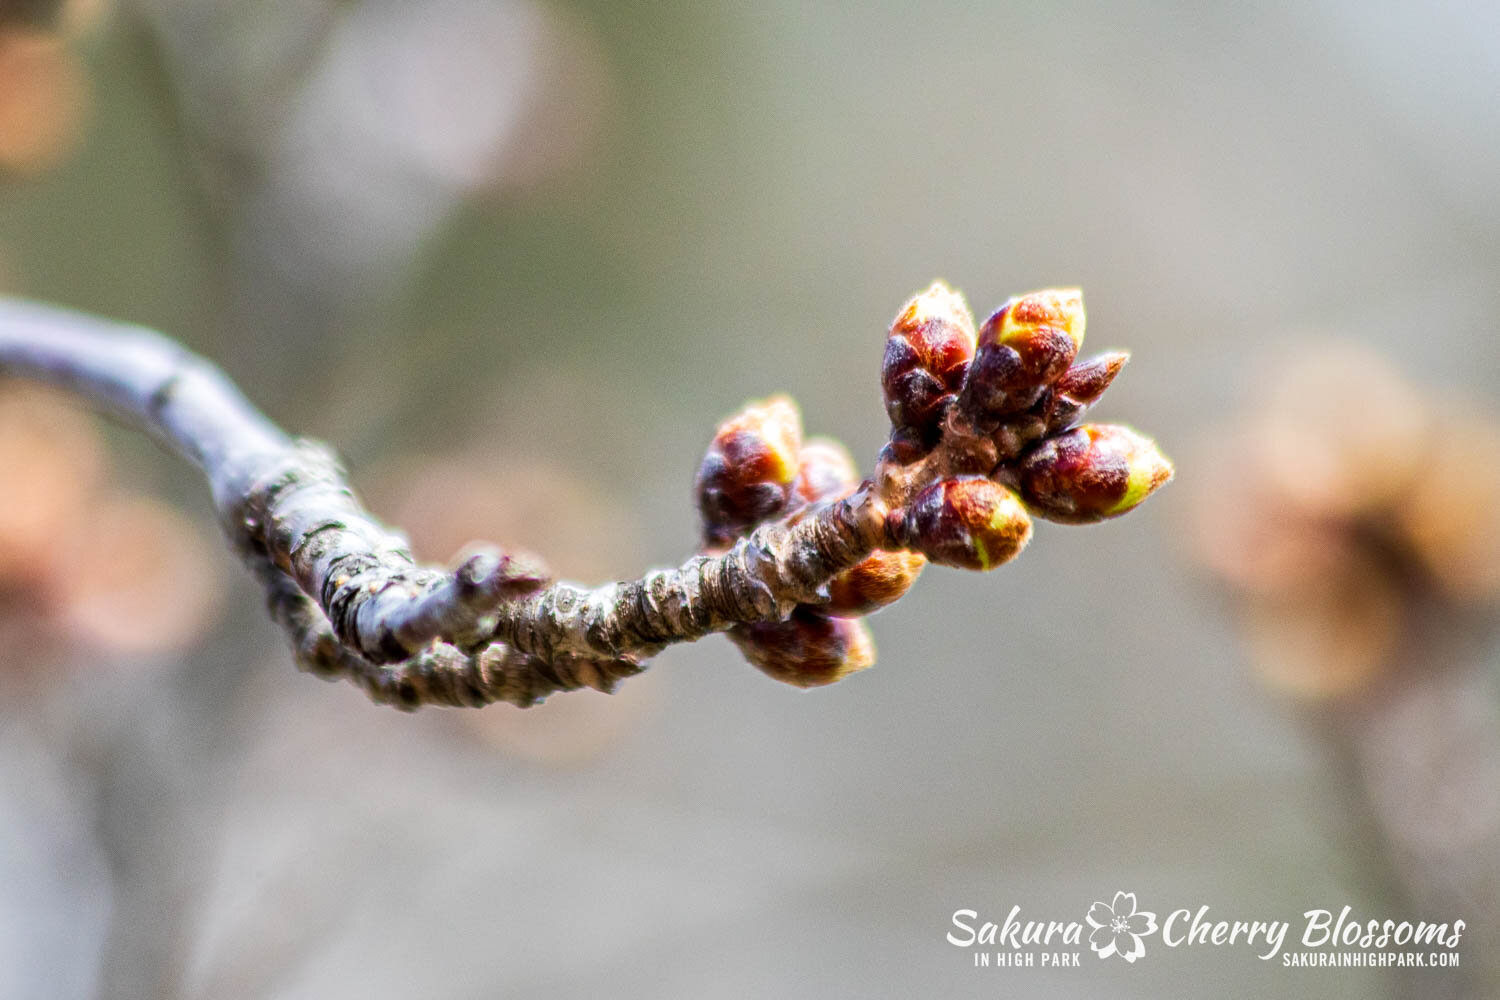 Sakura Watch March 20, 2024 - So blame it on the snow for a late post, but don't worry, this colder weather is only temporary and will slow down the progress. During my last visit, I saw that the buds were getting ready to move on from Stage 2 to 3! 